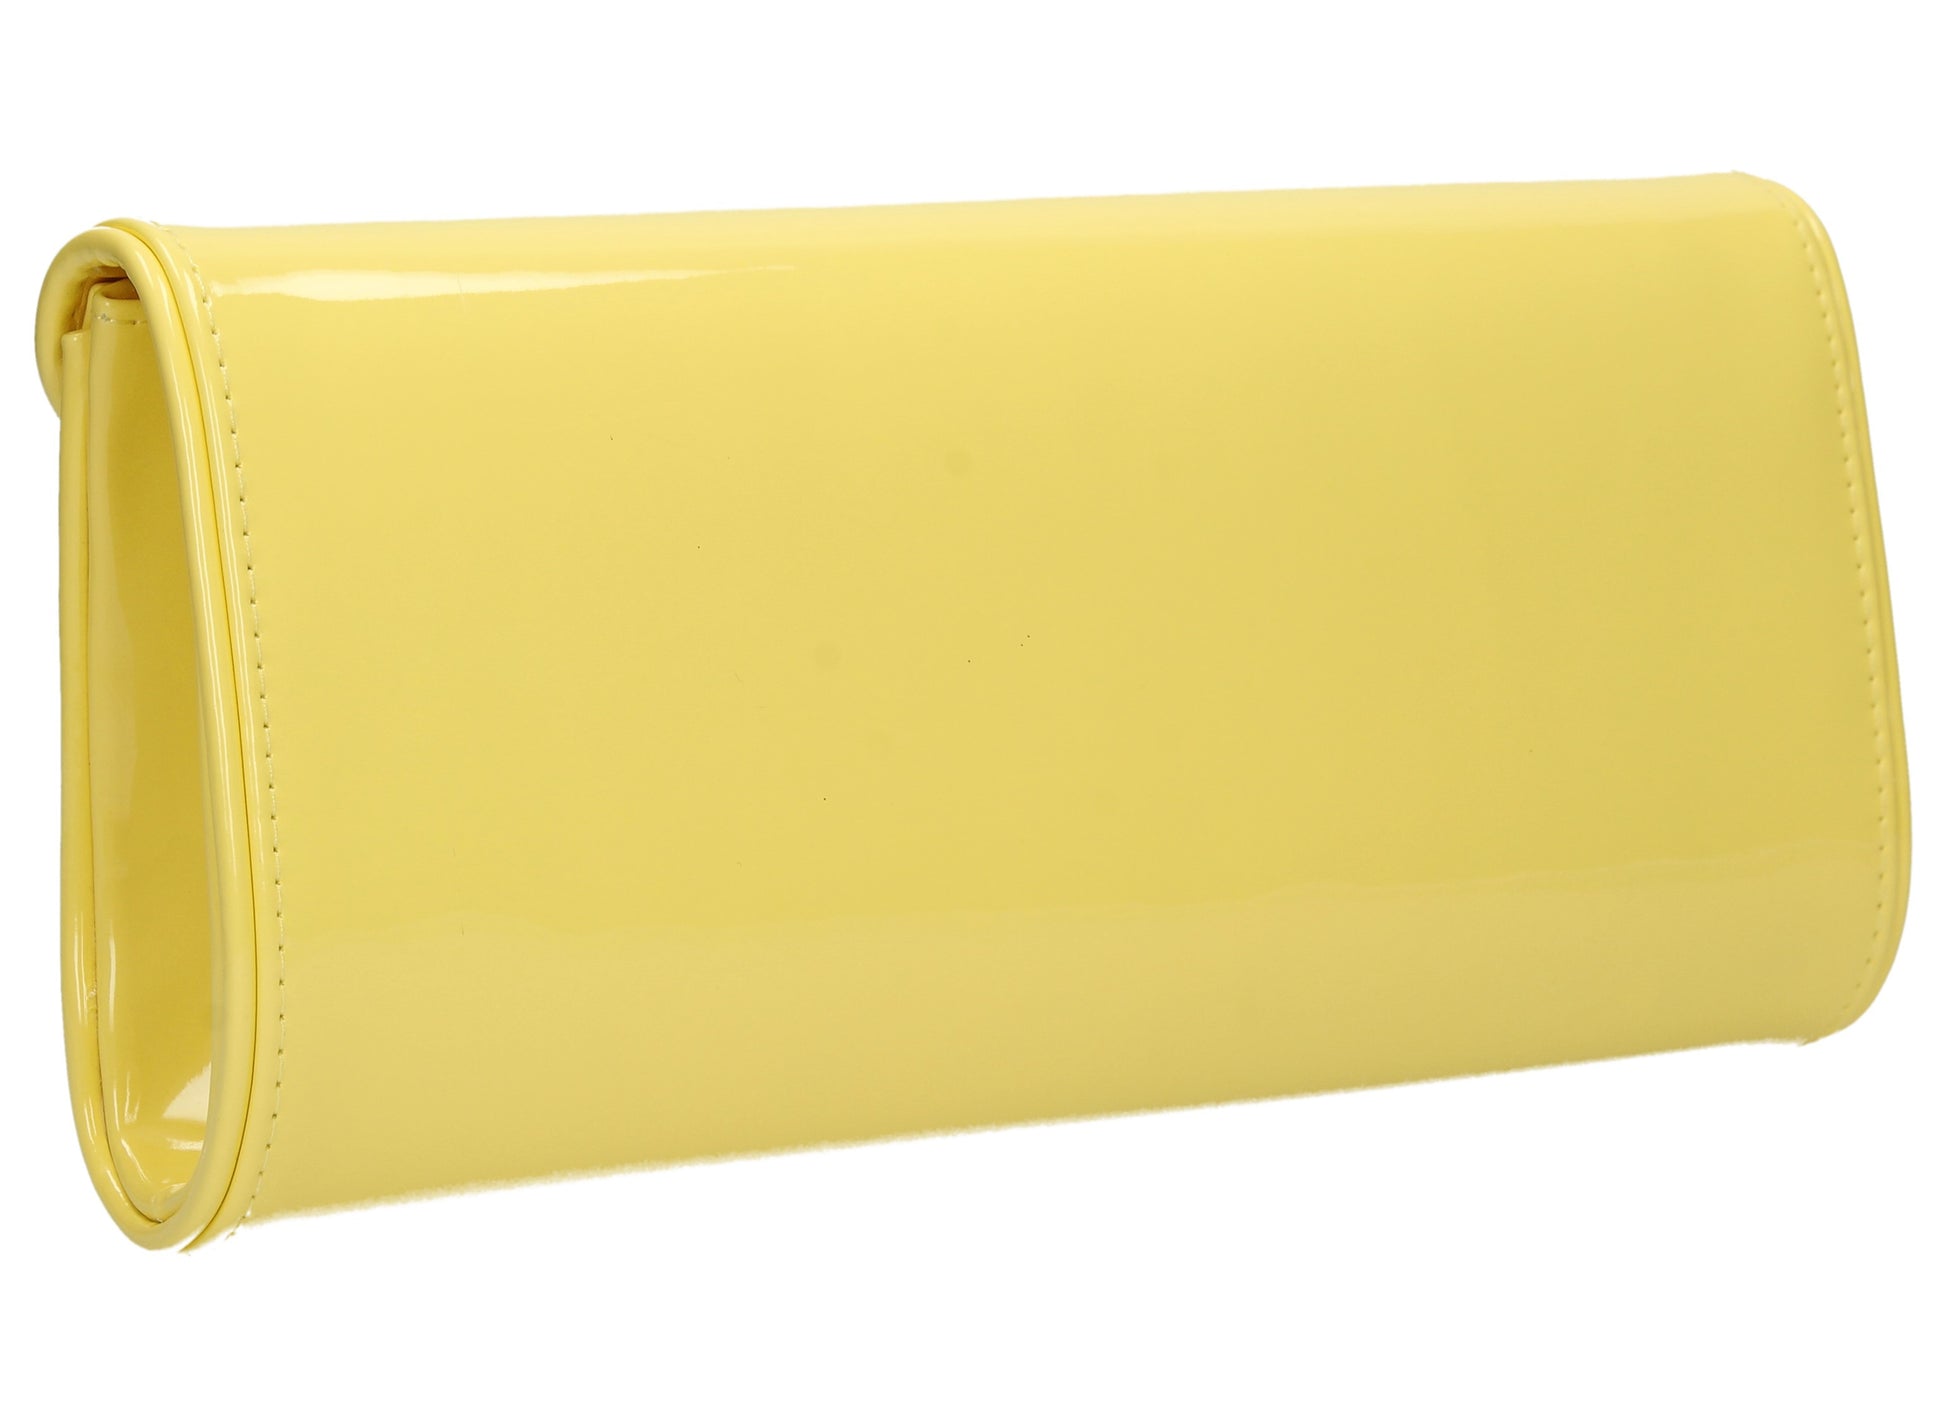 SWANKYSWANS Perry Patent Clutch Bag - Yellow Cute Cheap Clutch Bag For Weddings School and Work